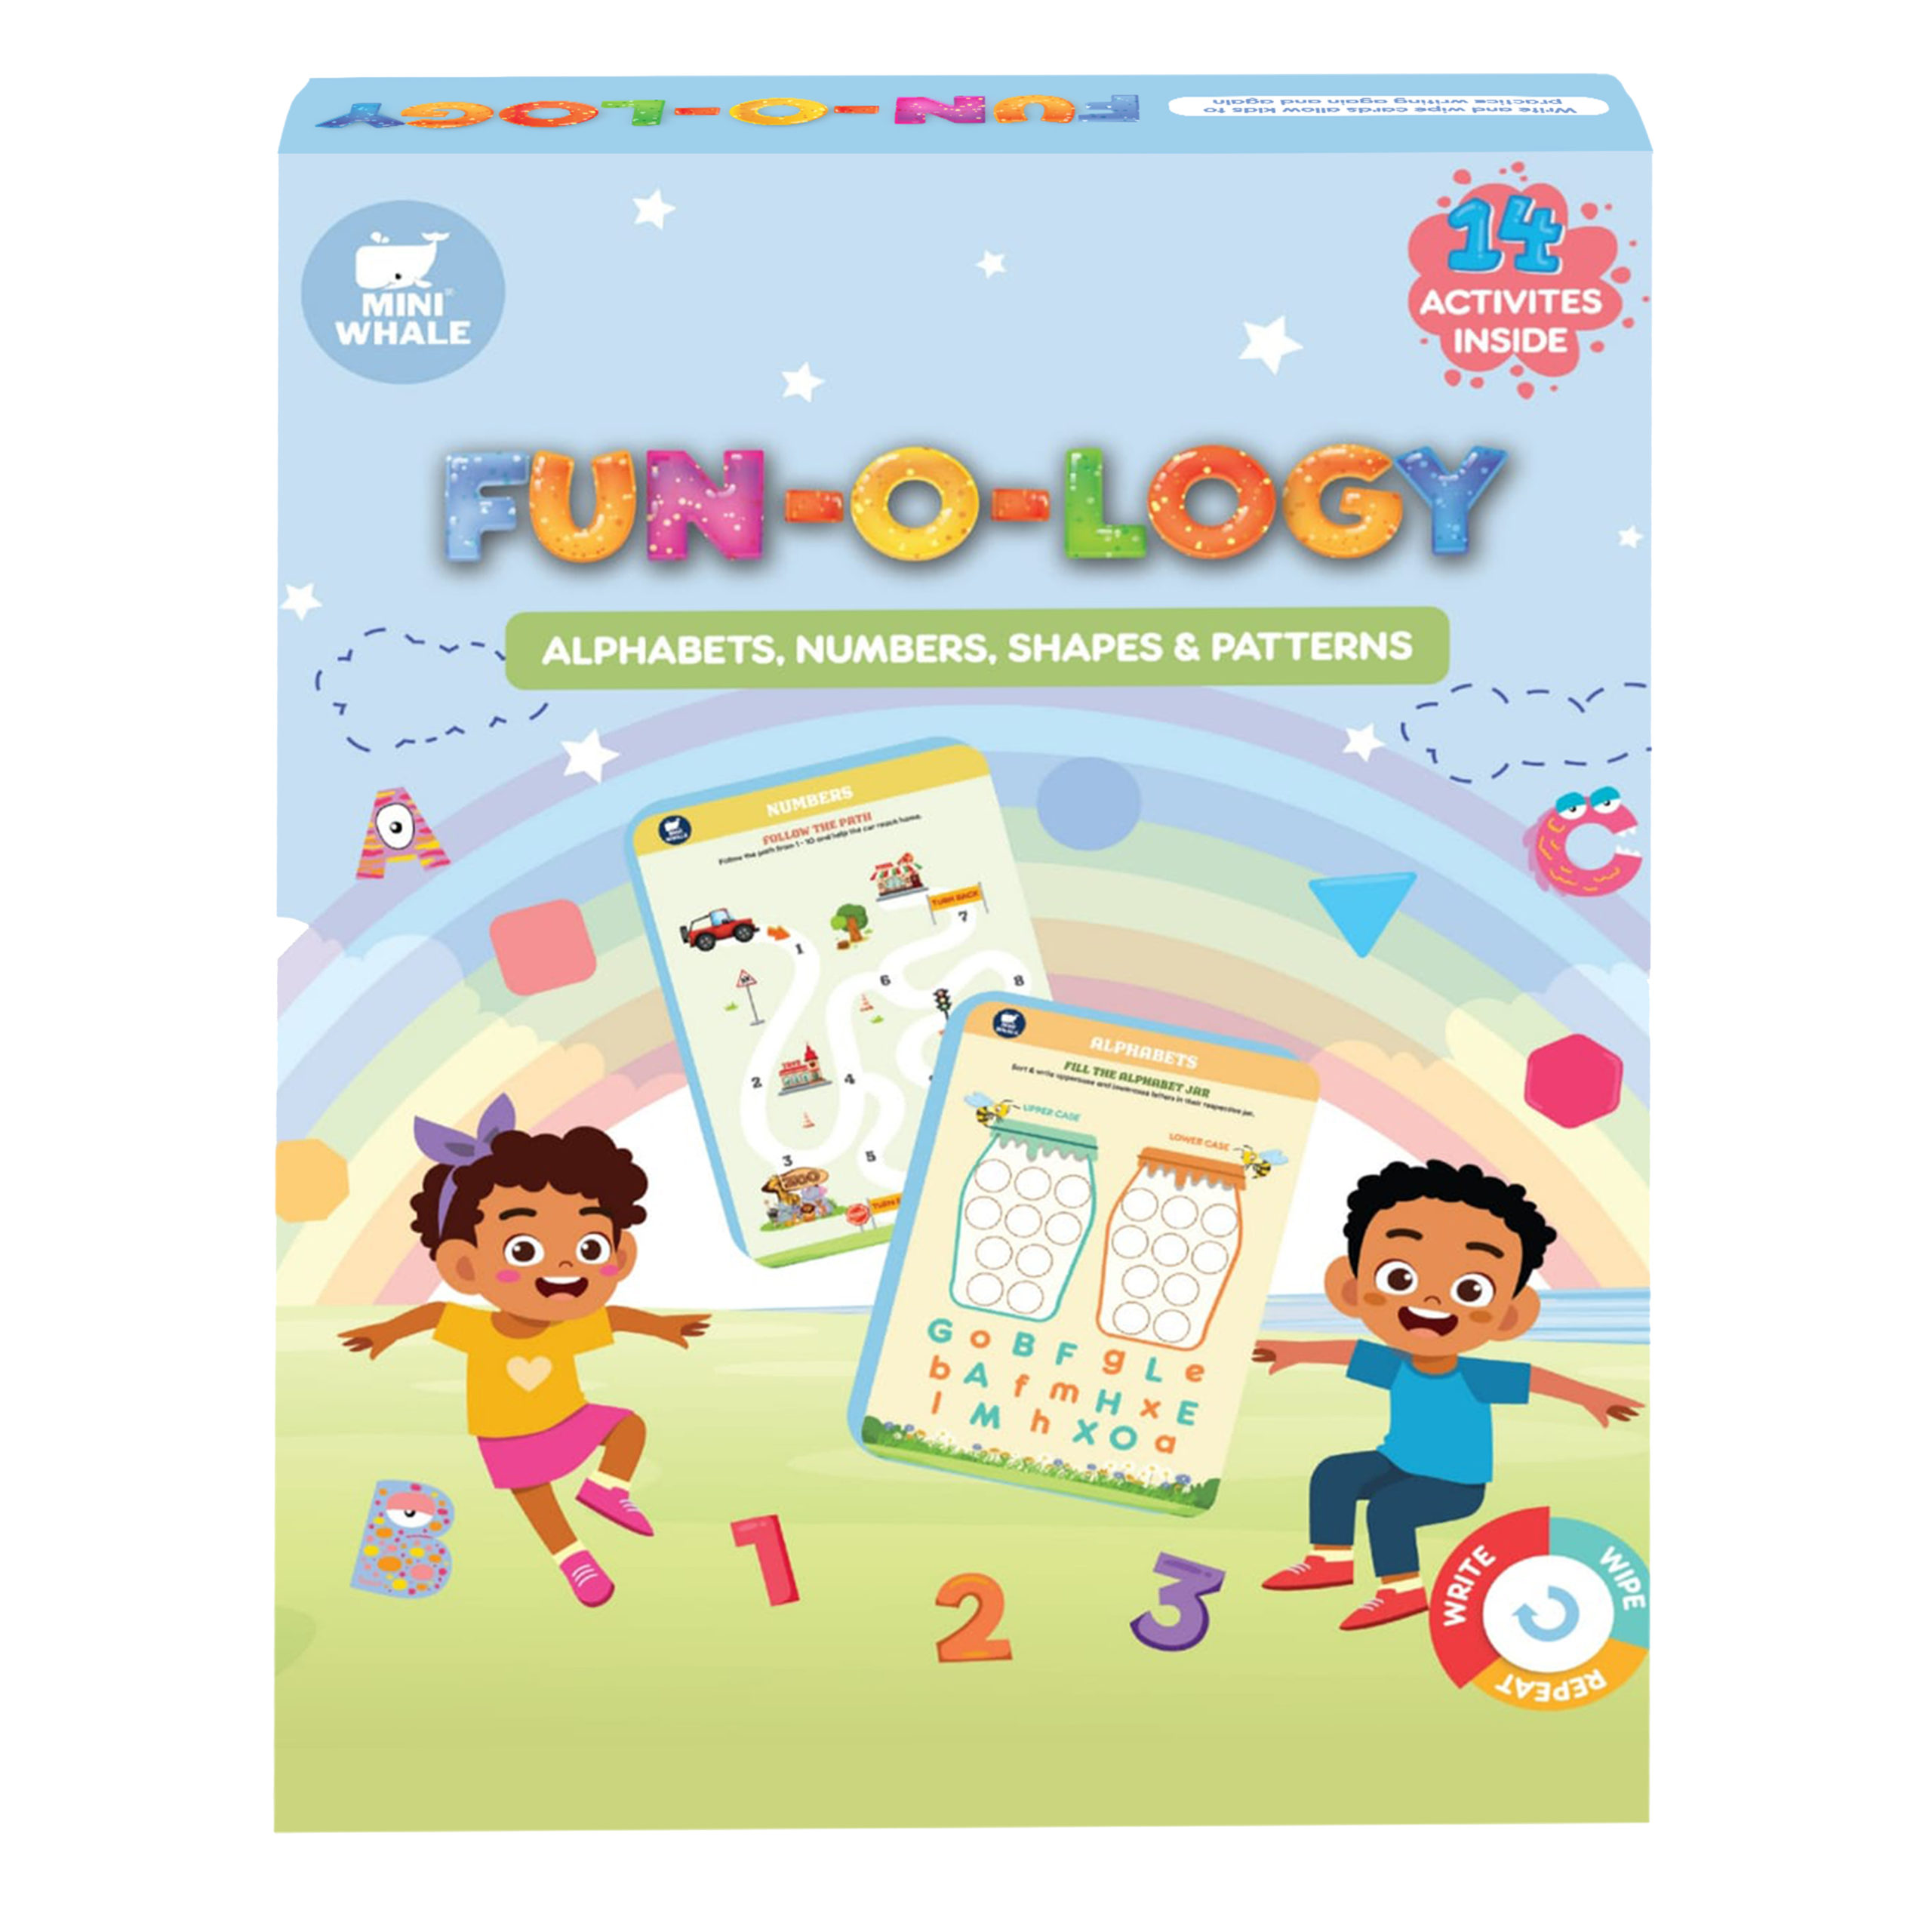 Miniwhale's Fun-O-Logy with alphabets, numbers, shapes and patterns